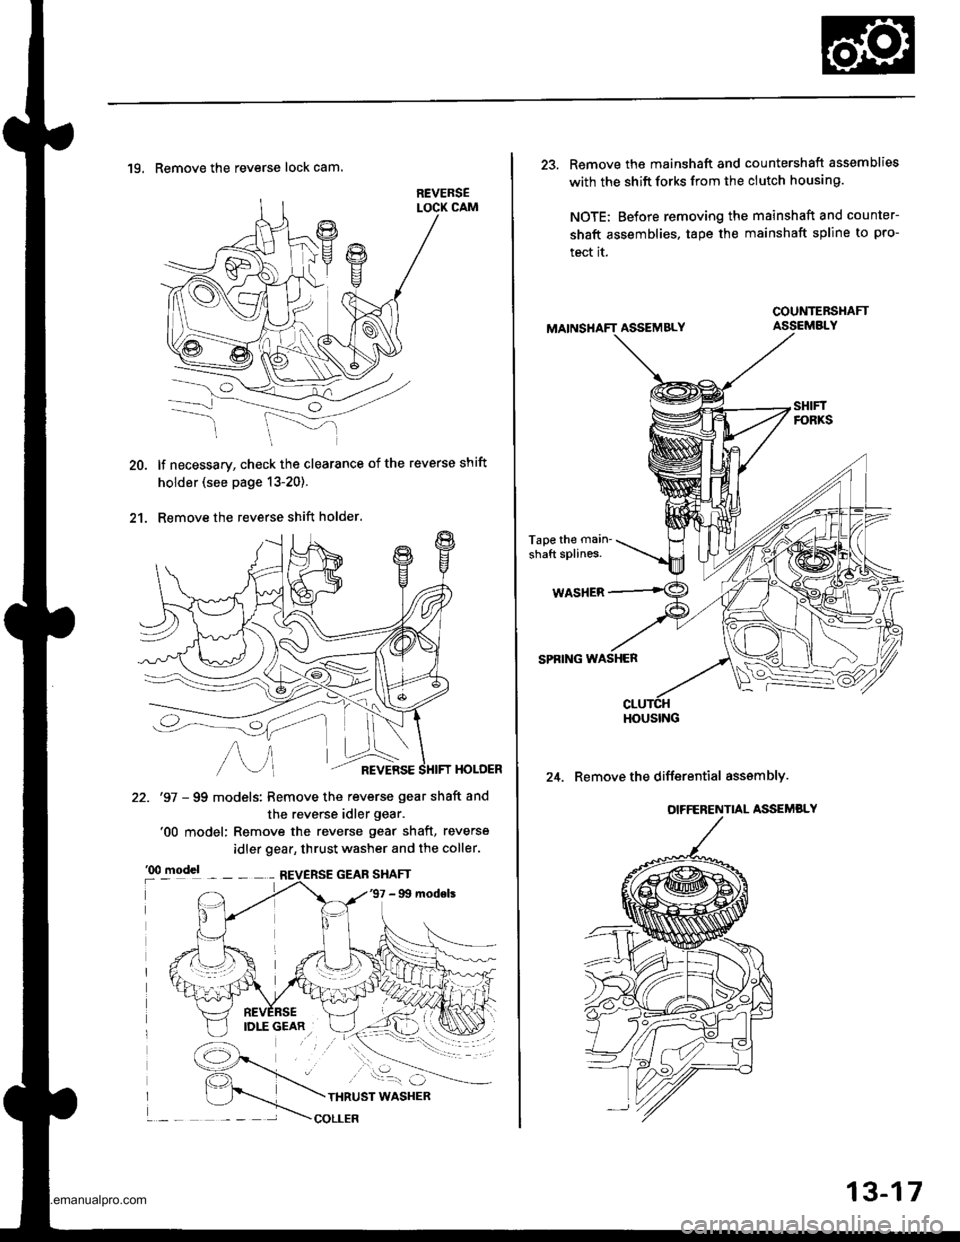 HONDA CR-V 1997 RD1-RD3 / 1.G Workshop Manual 
20.
2t.
19. Remove the reverse lock cam.
lf necessary, check the clearance of the reverse shift
holder (see page 13-20).
Remove the reverse shift holder.
HOLOER
22. 97 - 99 models: Remove the rever